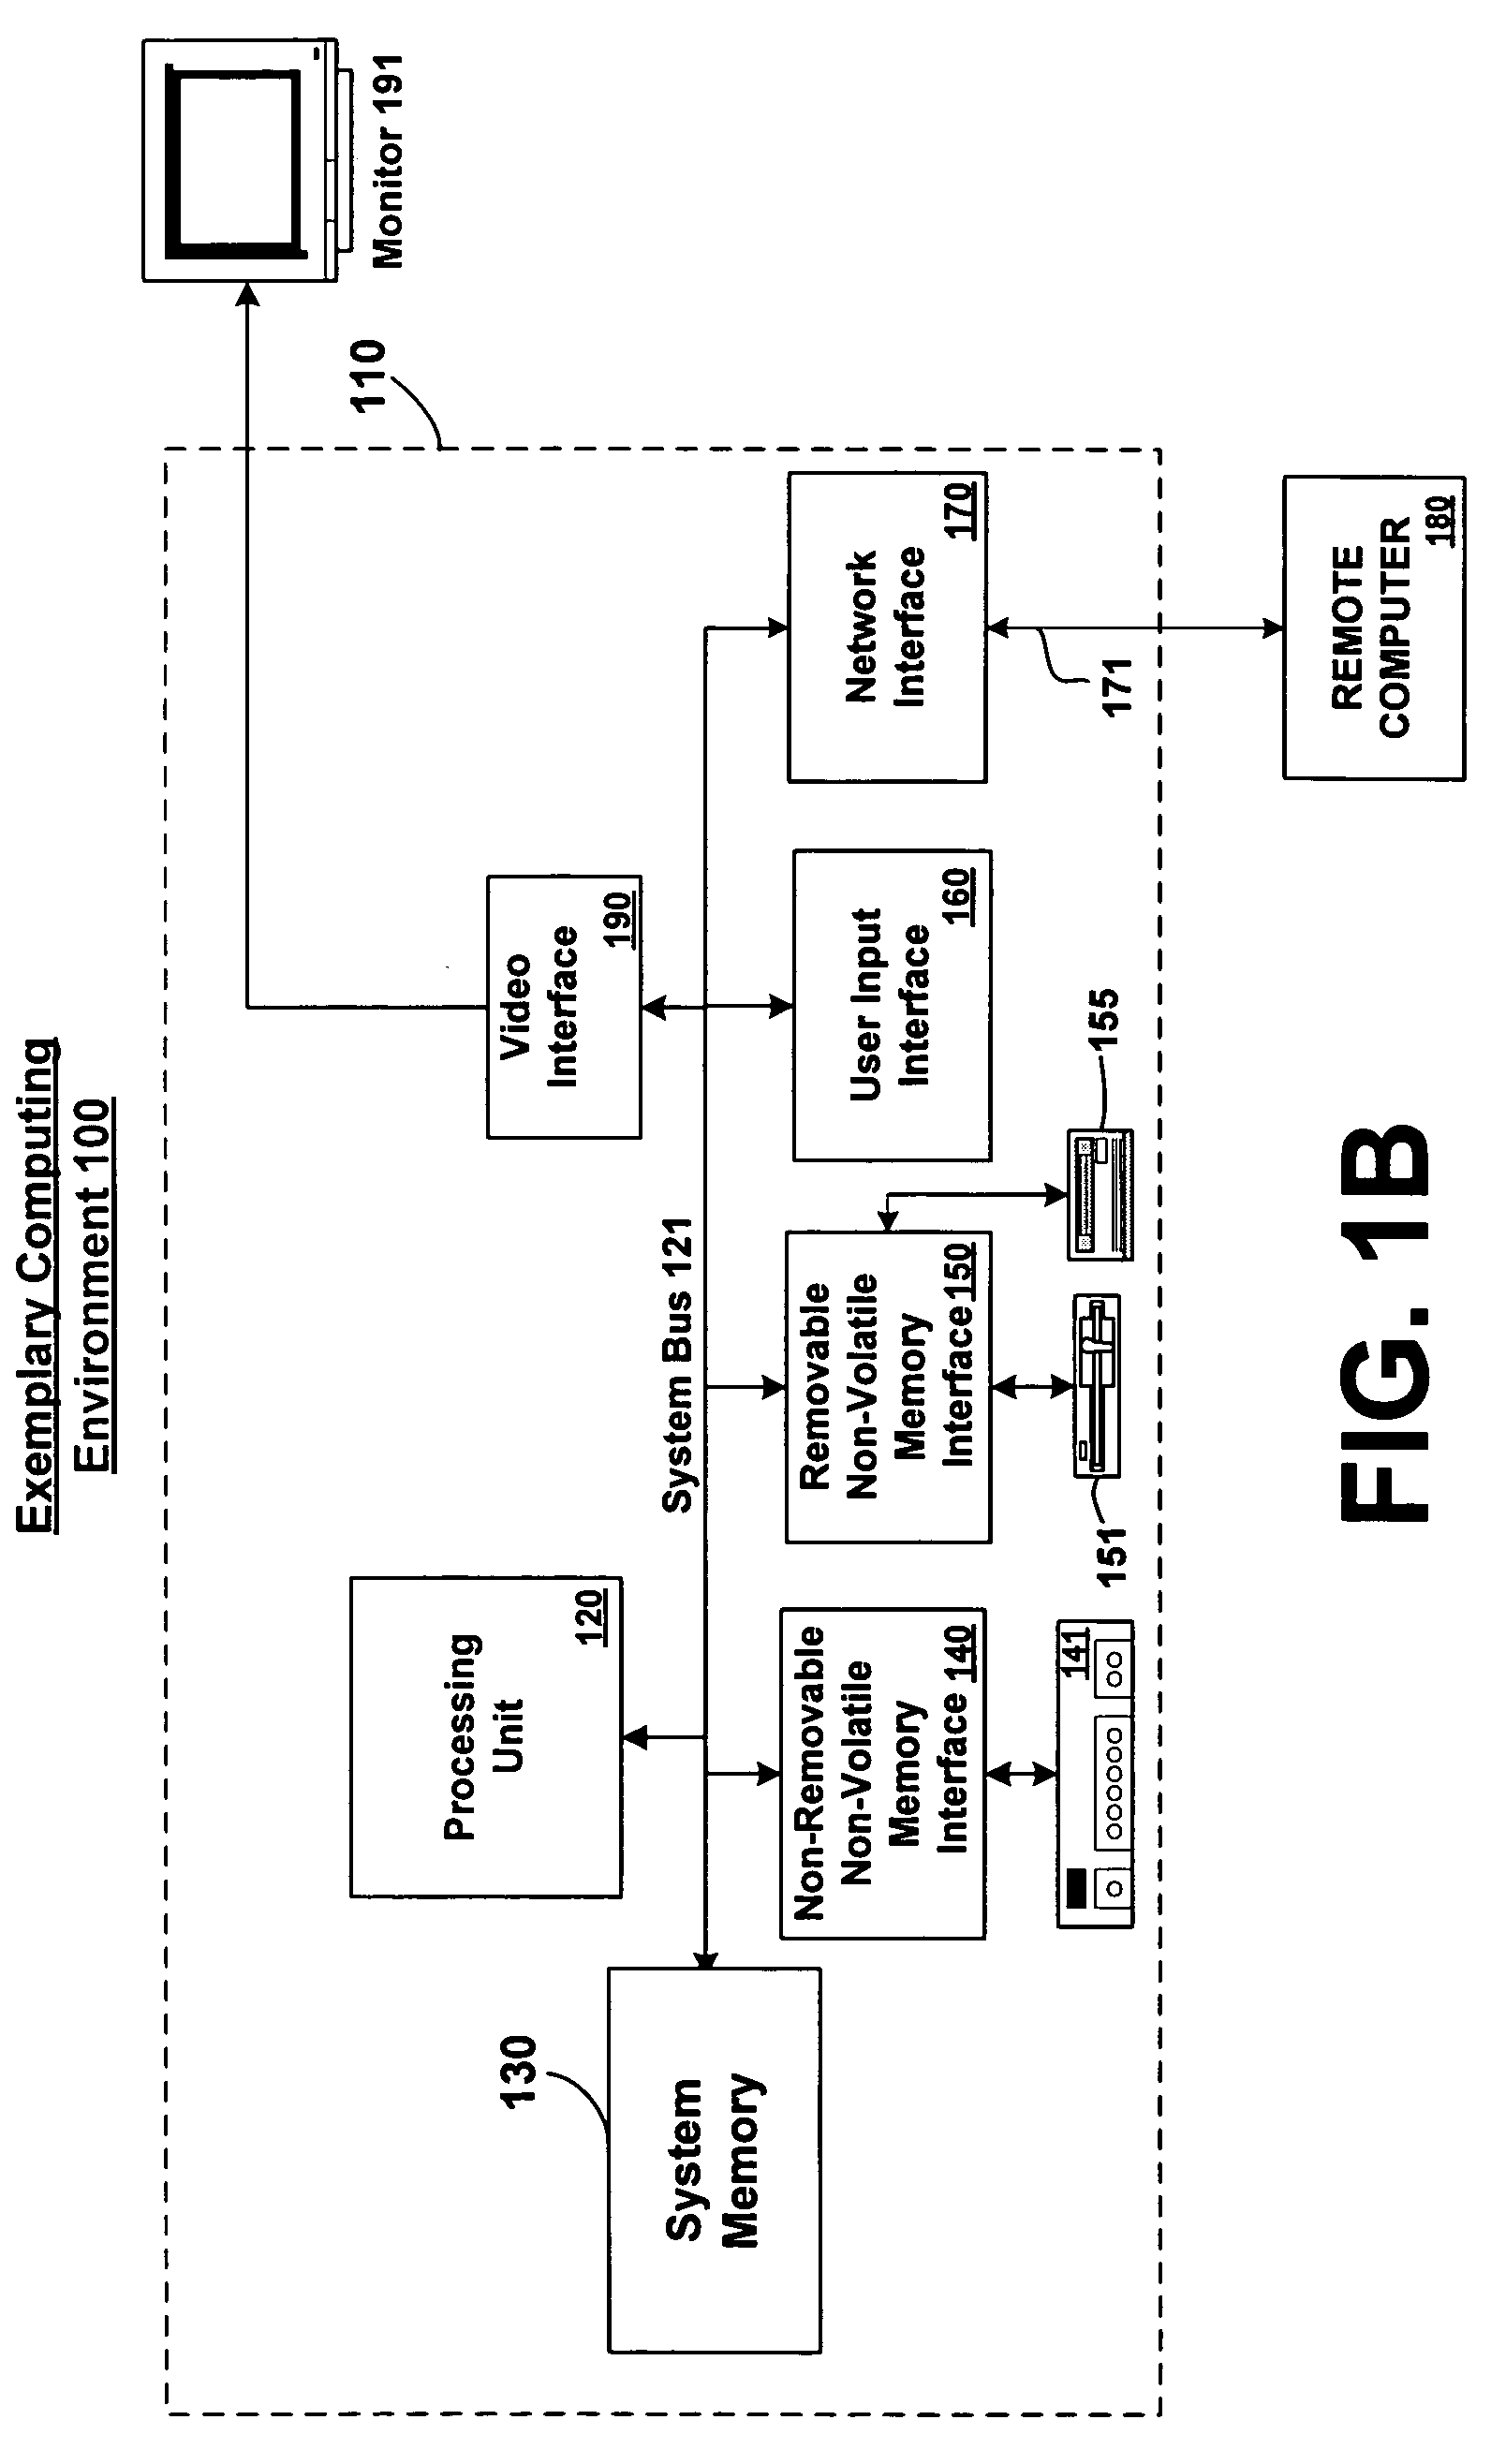 Systems and methods for indexing content for fast and scalable retrieval